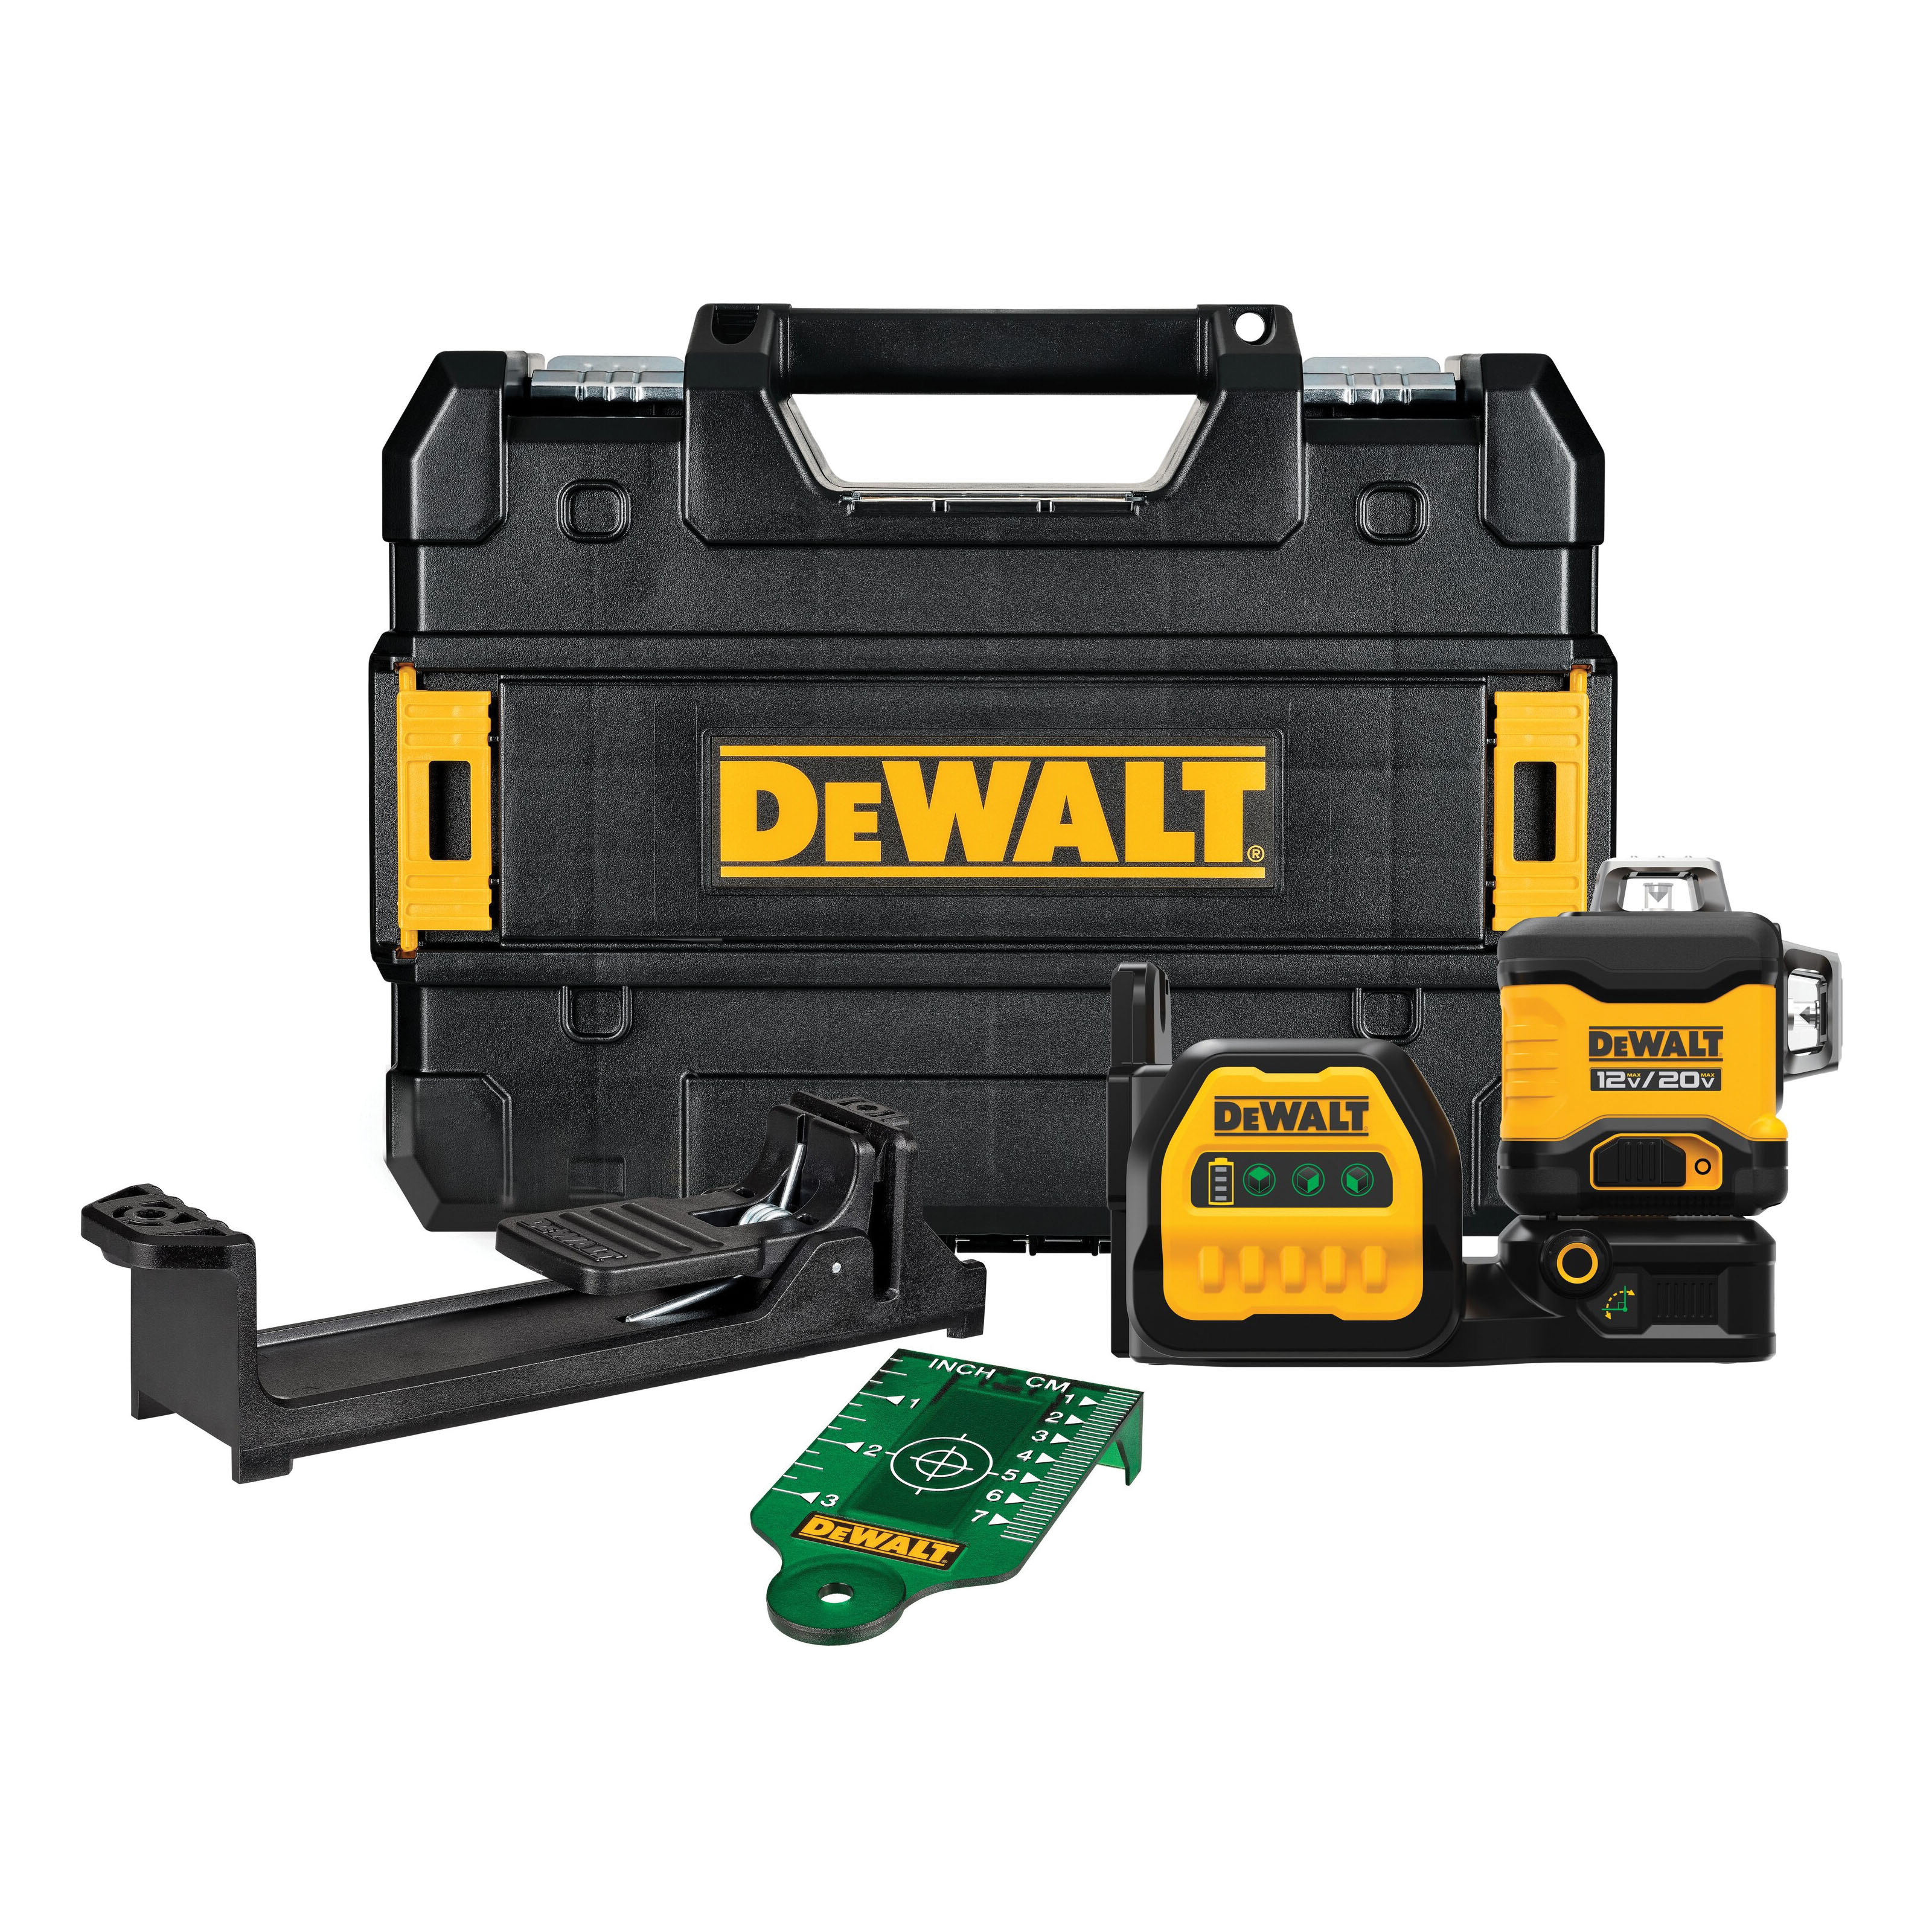 DeWALT DCLE34030GB Cross Line Laser Level, 165 ft, 1/8 in at 30 ft Accuracy, 3-Beam, Green Laser